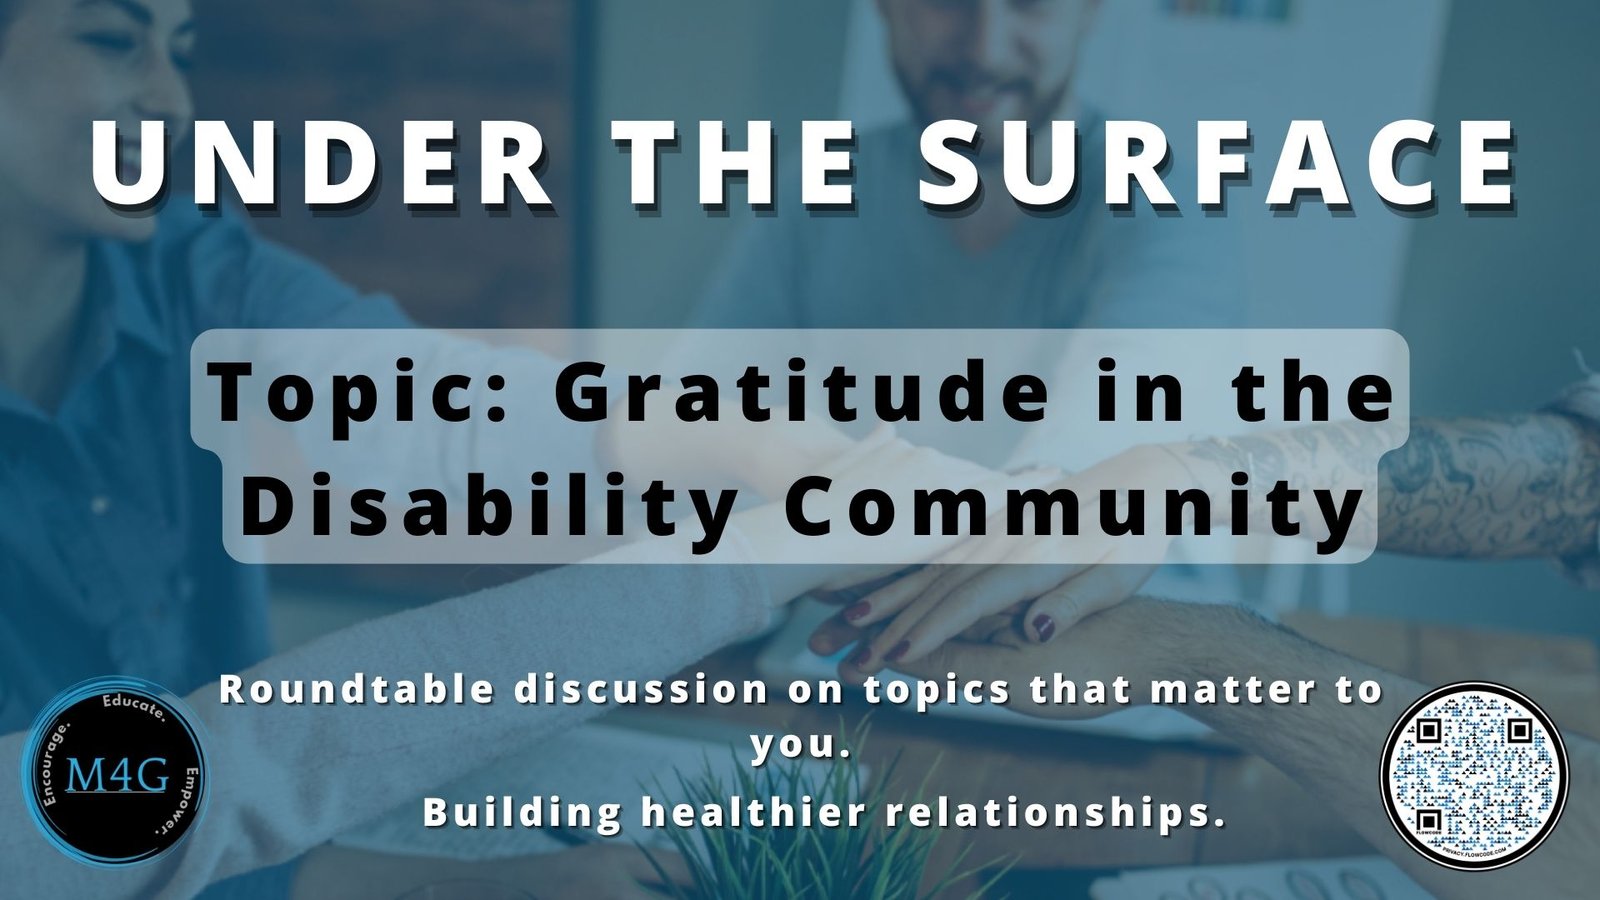 Under the Surface: Season 2, Episode 1 - Gratitude in the Disability Community